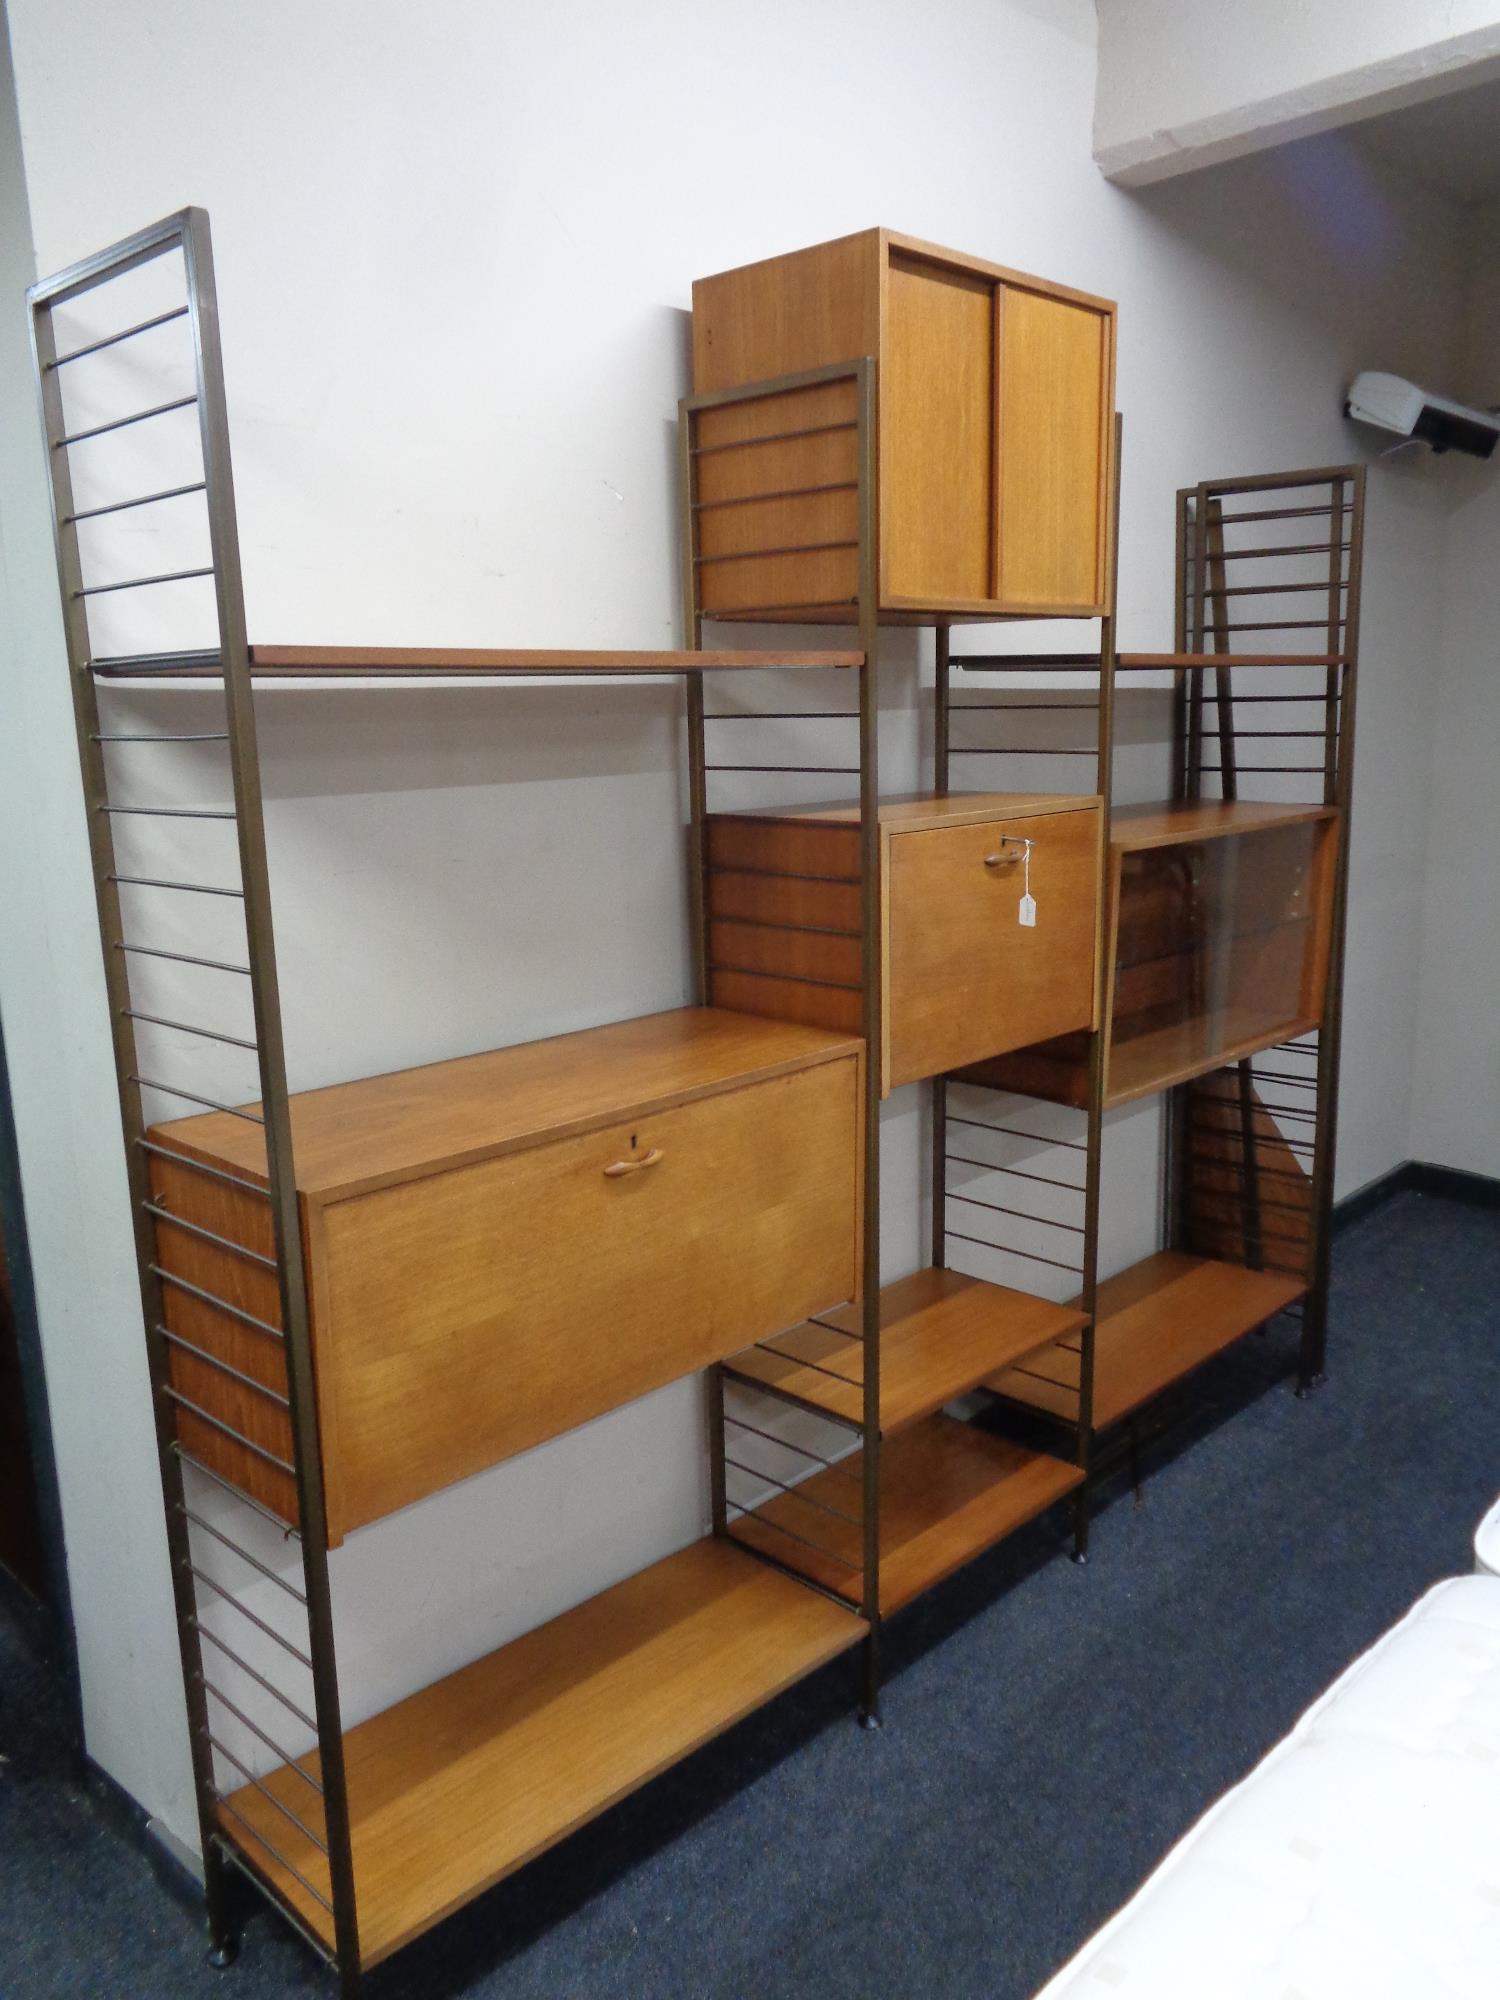 A mid 20th century Staples Ladderax three bay modular shelving unit together with matching four